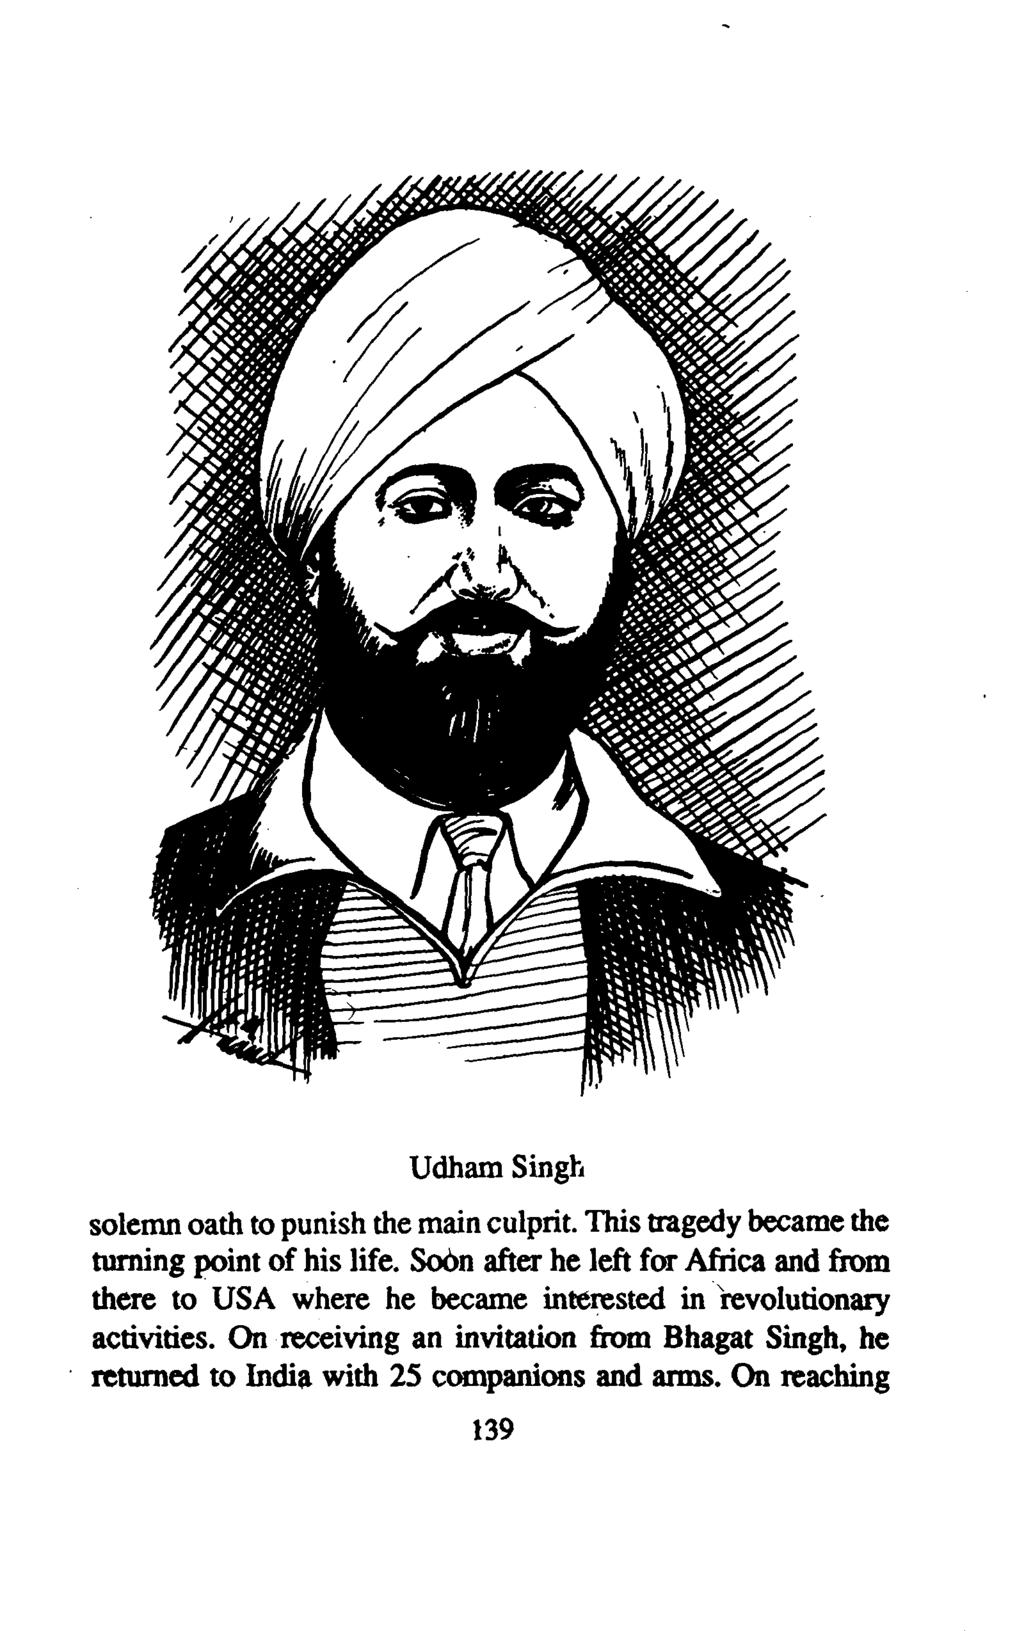 Udham Singh solemn oath to punish the main culprit. This tragedy became the turning point of his life.